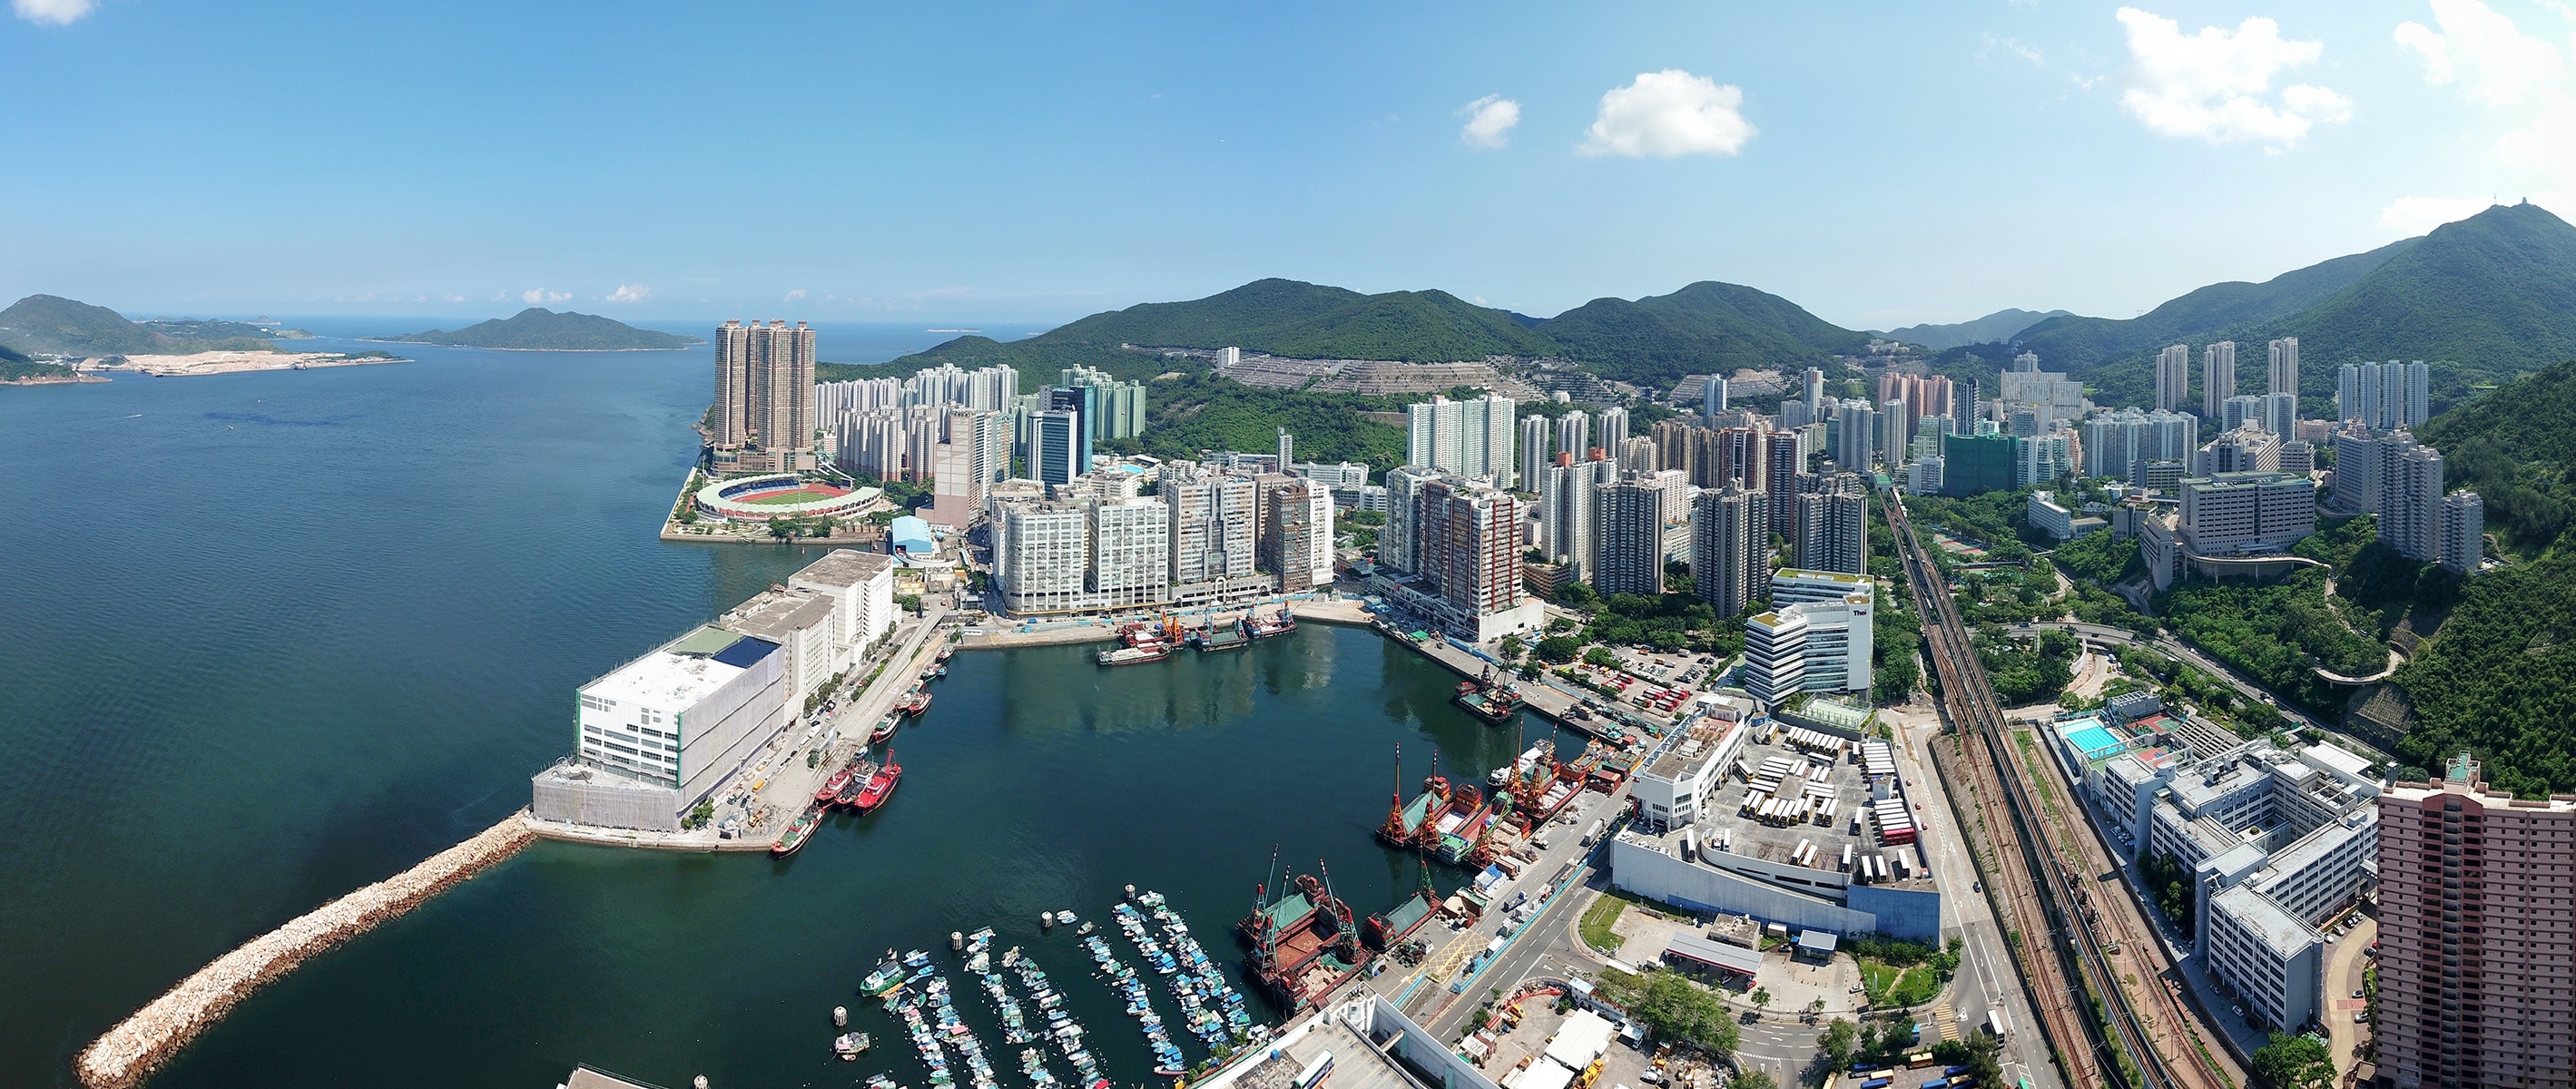 Photo "Chai Wan" by Wpcpey (page does not exist) (CC BY-SA) / Cropped from original